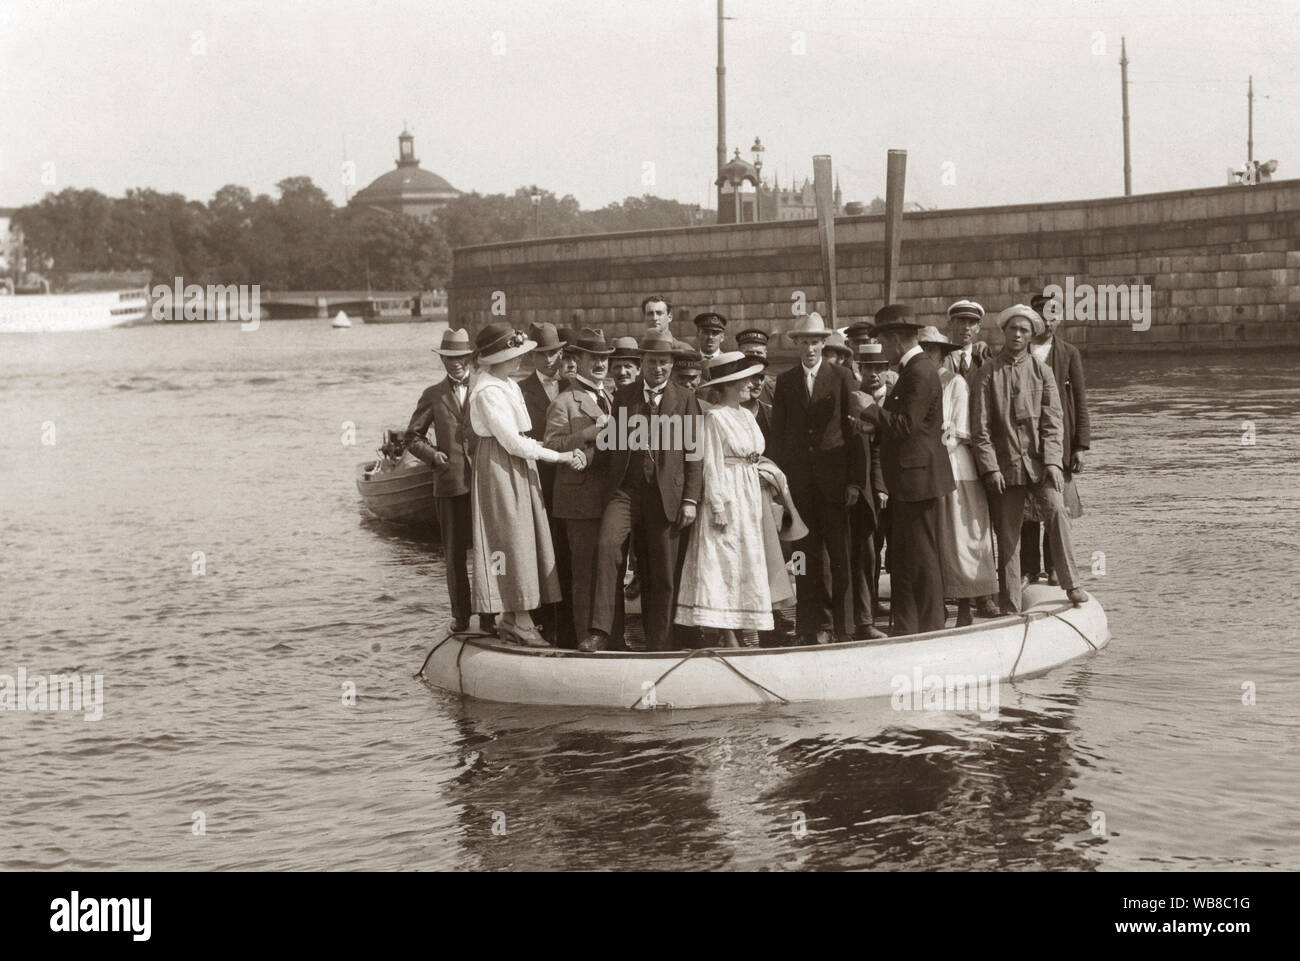 Invention of the 1910s. A lift raft designed to carry 30 people is being tried for the first time. It's made out of 10 mm wood with oiled sailing canvas, and in waterproof bulkheads. Designed and manufactured by Edvard Källström in Oskarshamn. Juli 22 1919 Stock Photo